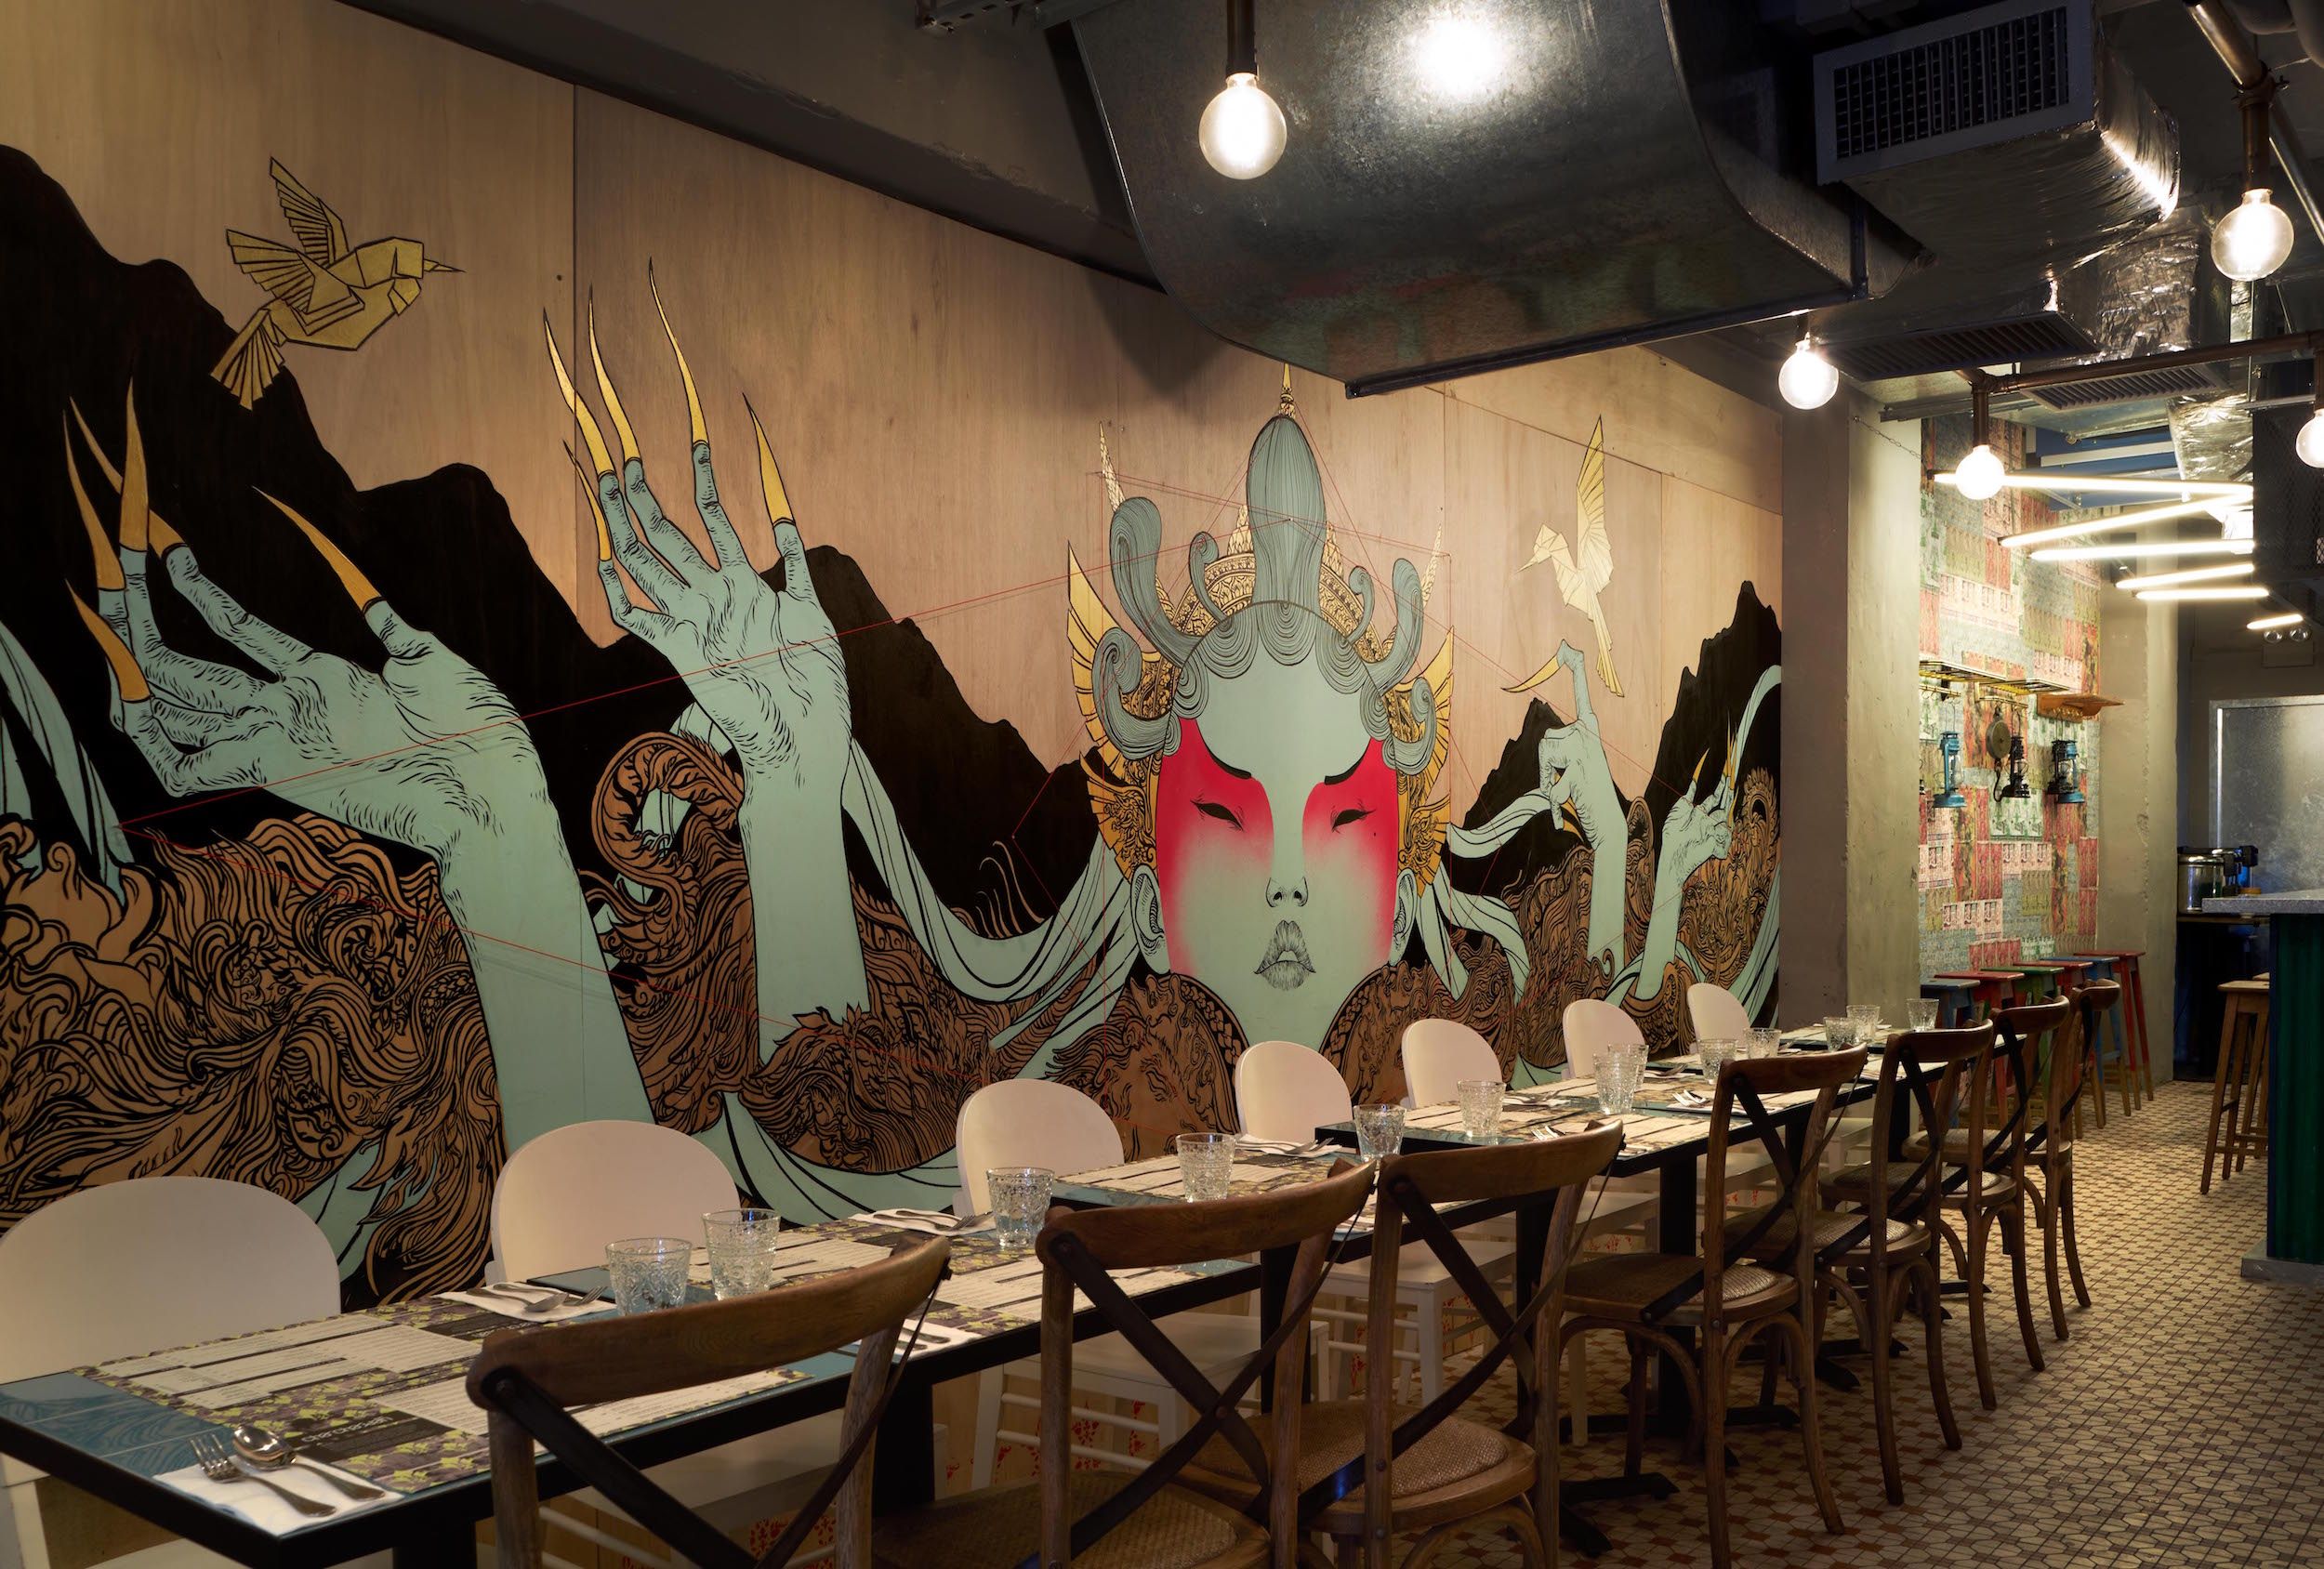 JIA Group’s new late-night supper club is going entirely off-menu